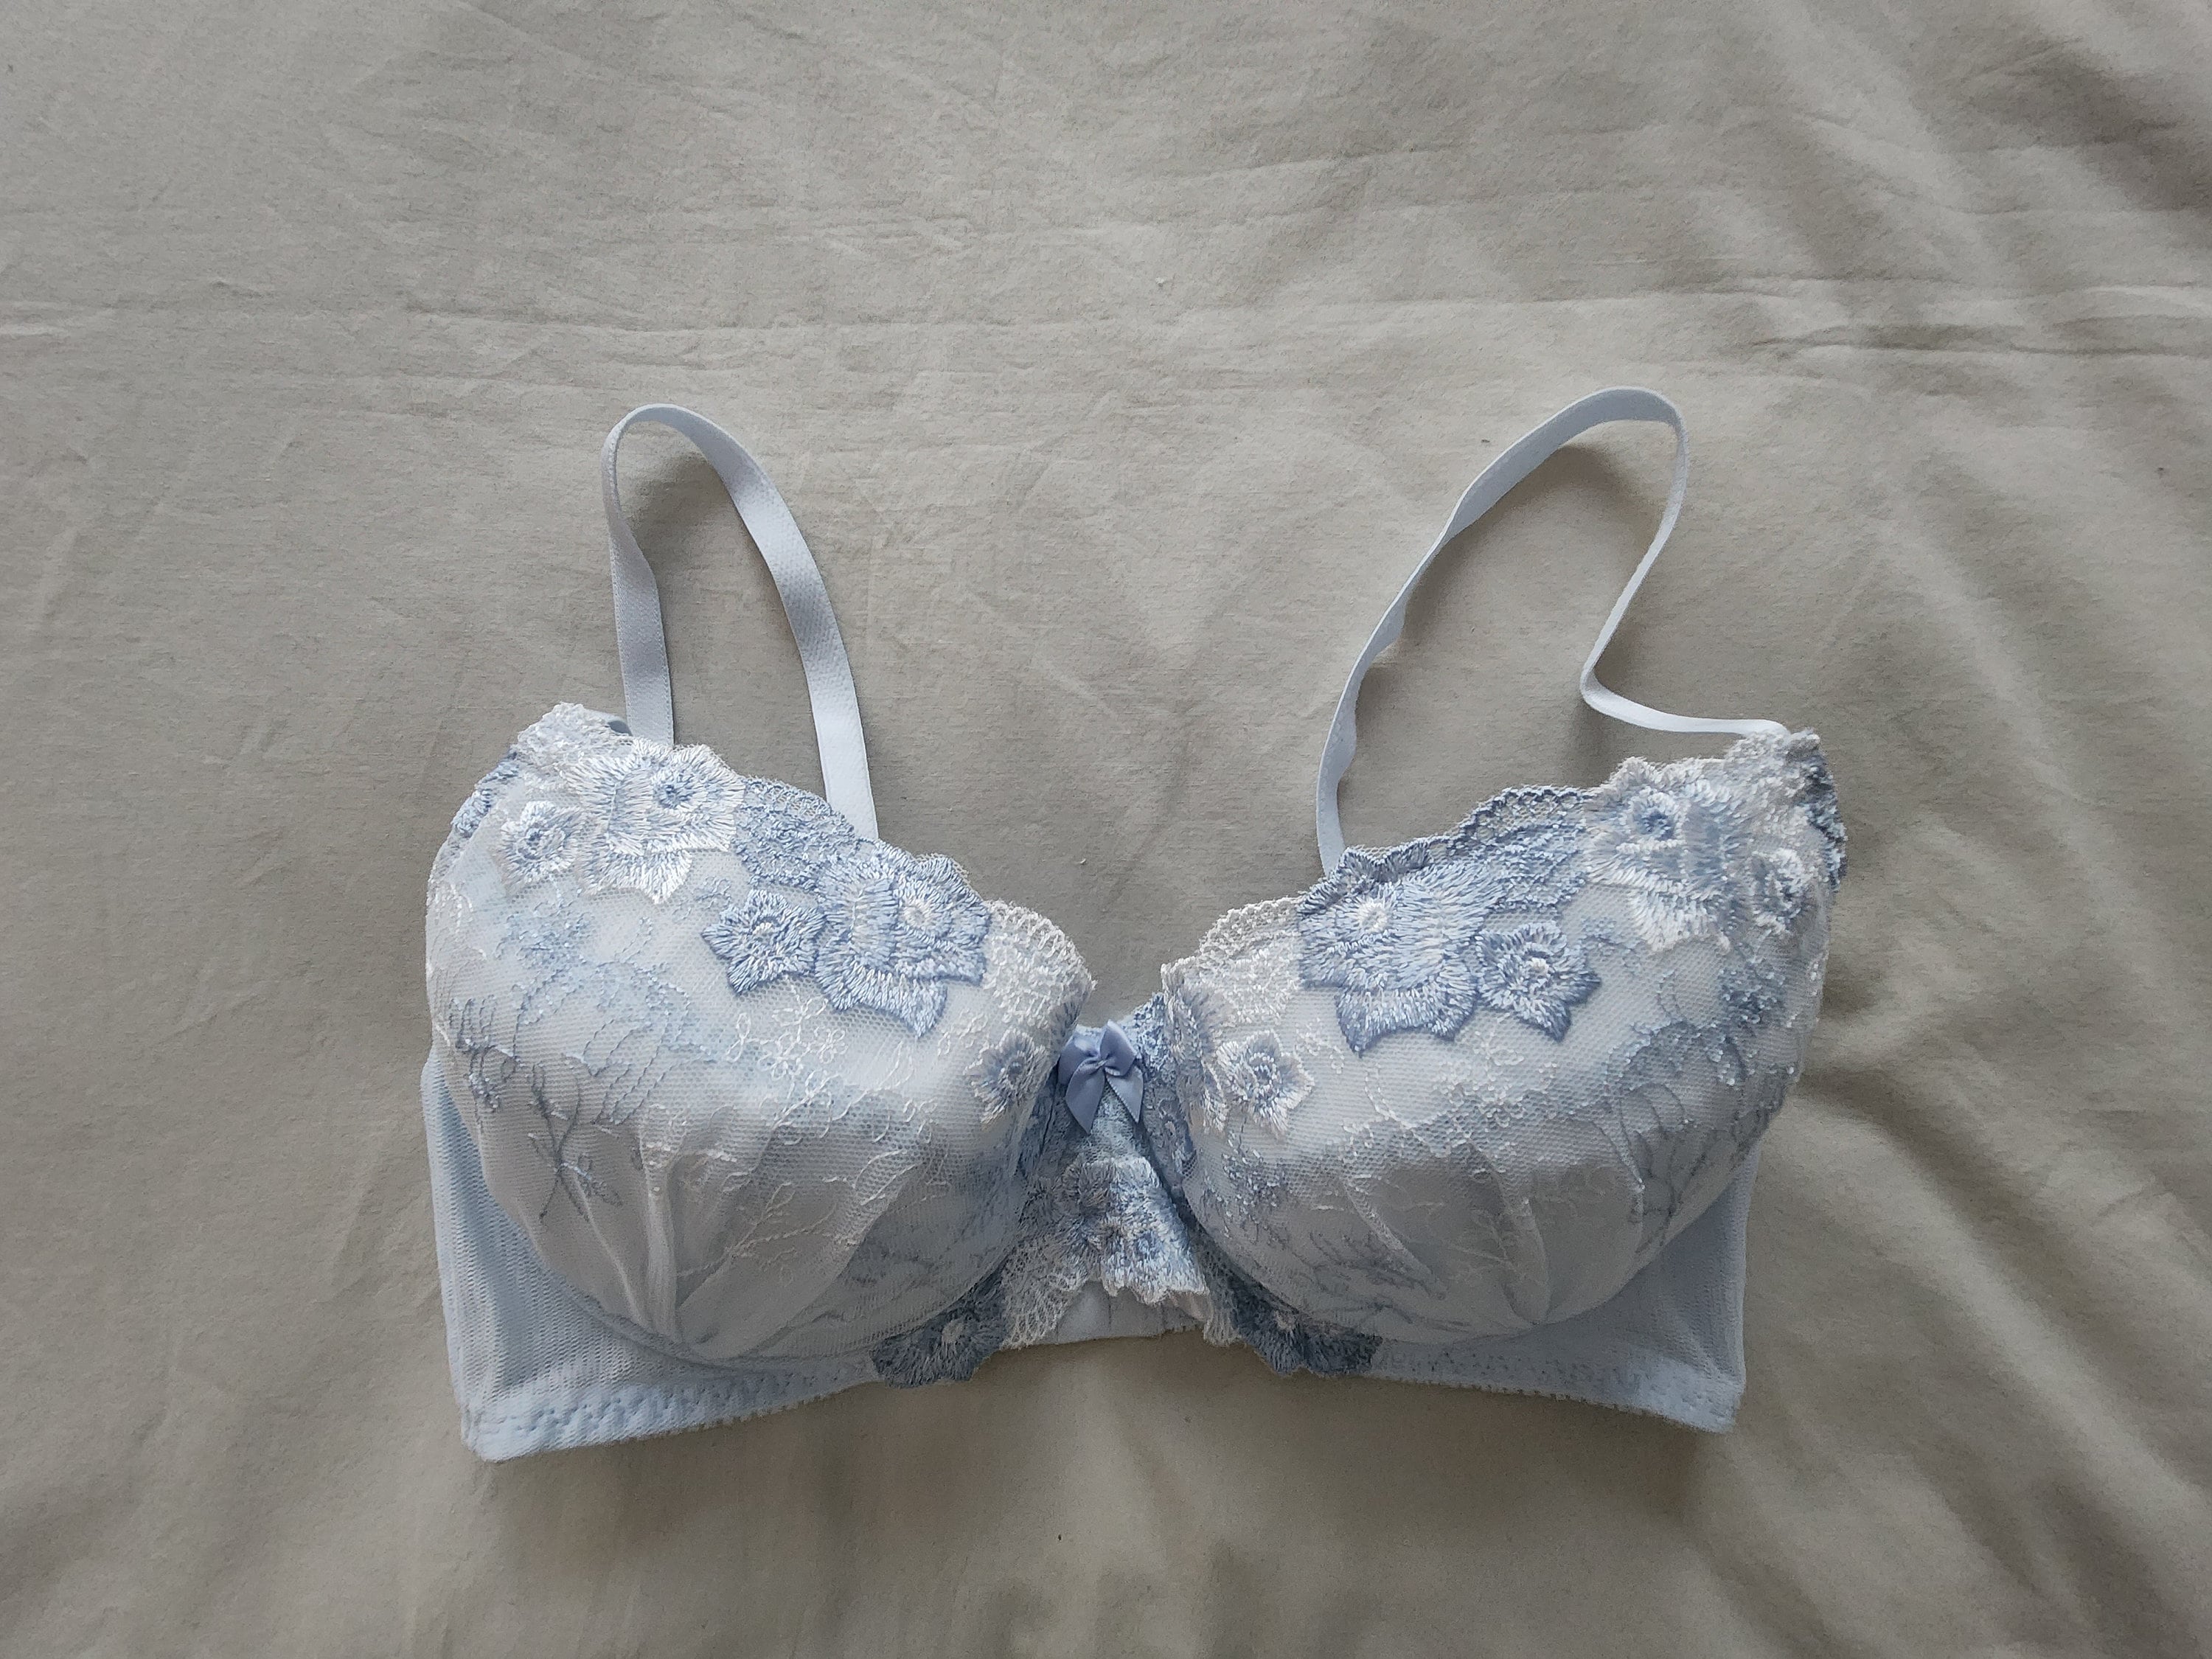 Vintage New Old Stock Bra From Japan size 12B Aus & 34B UK/US, Japan D75 